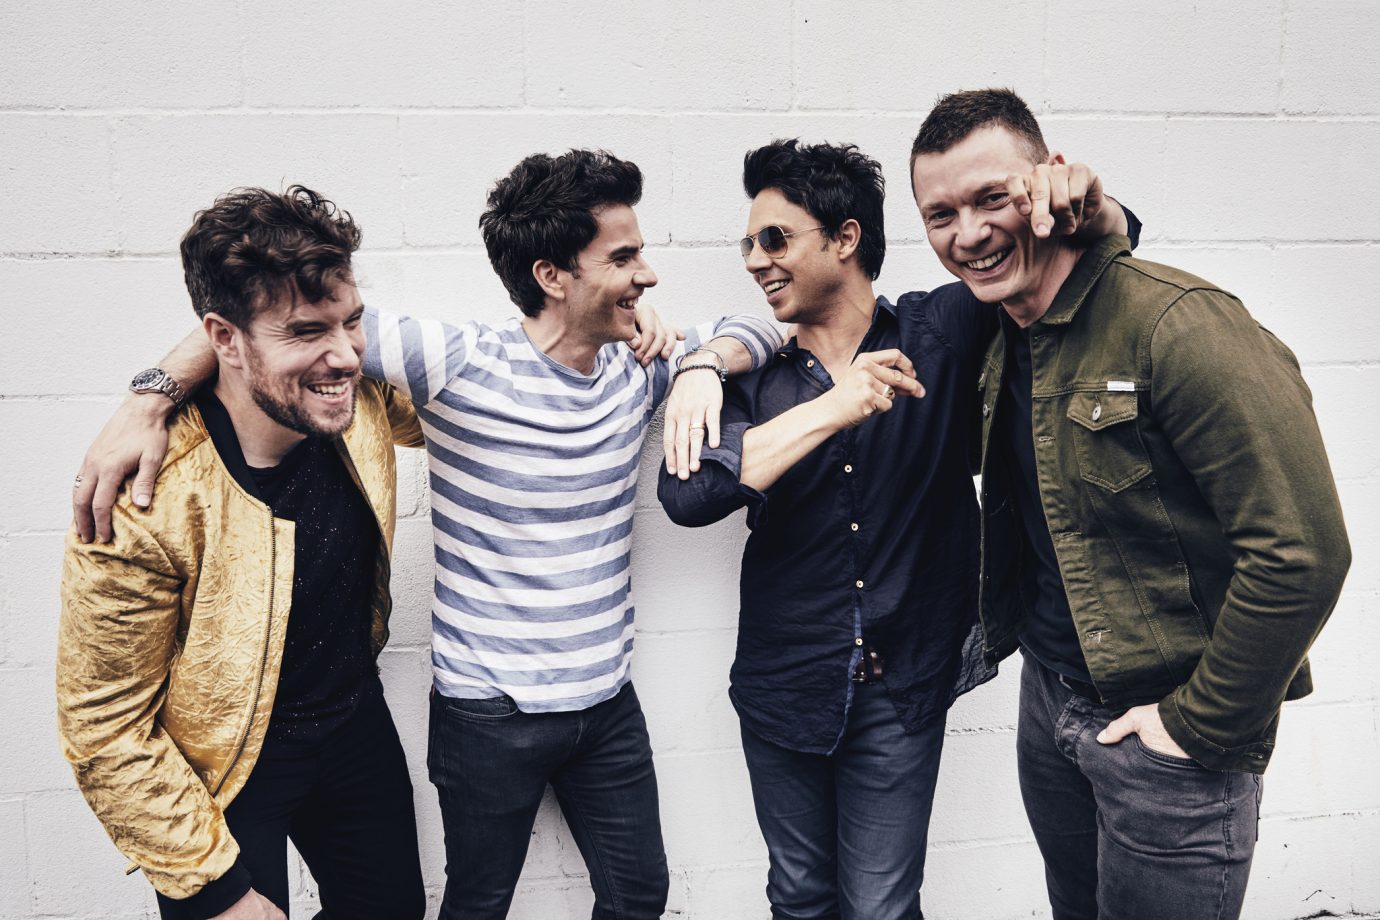 STEREOPHONICS RELEASE NEW ALBUM ‘SCREAM ABOVE THE SOUNDS’ ON NOVEMBER